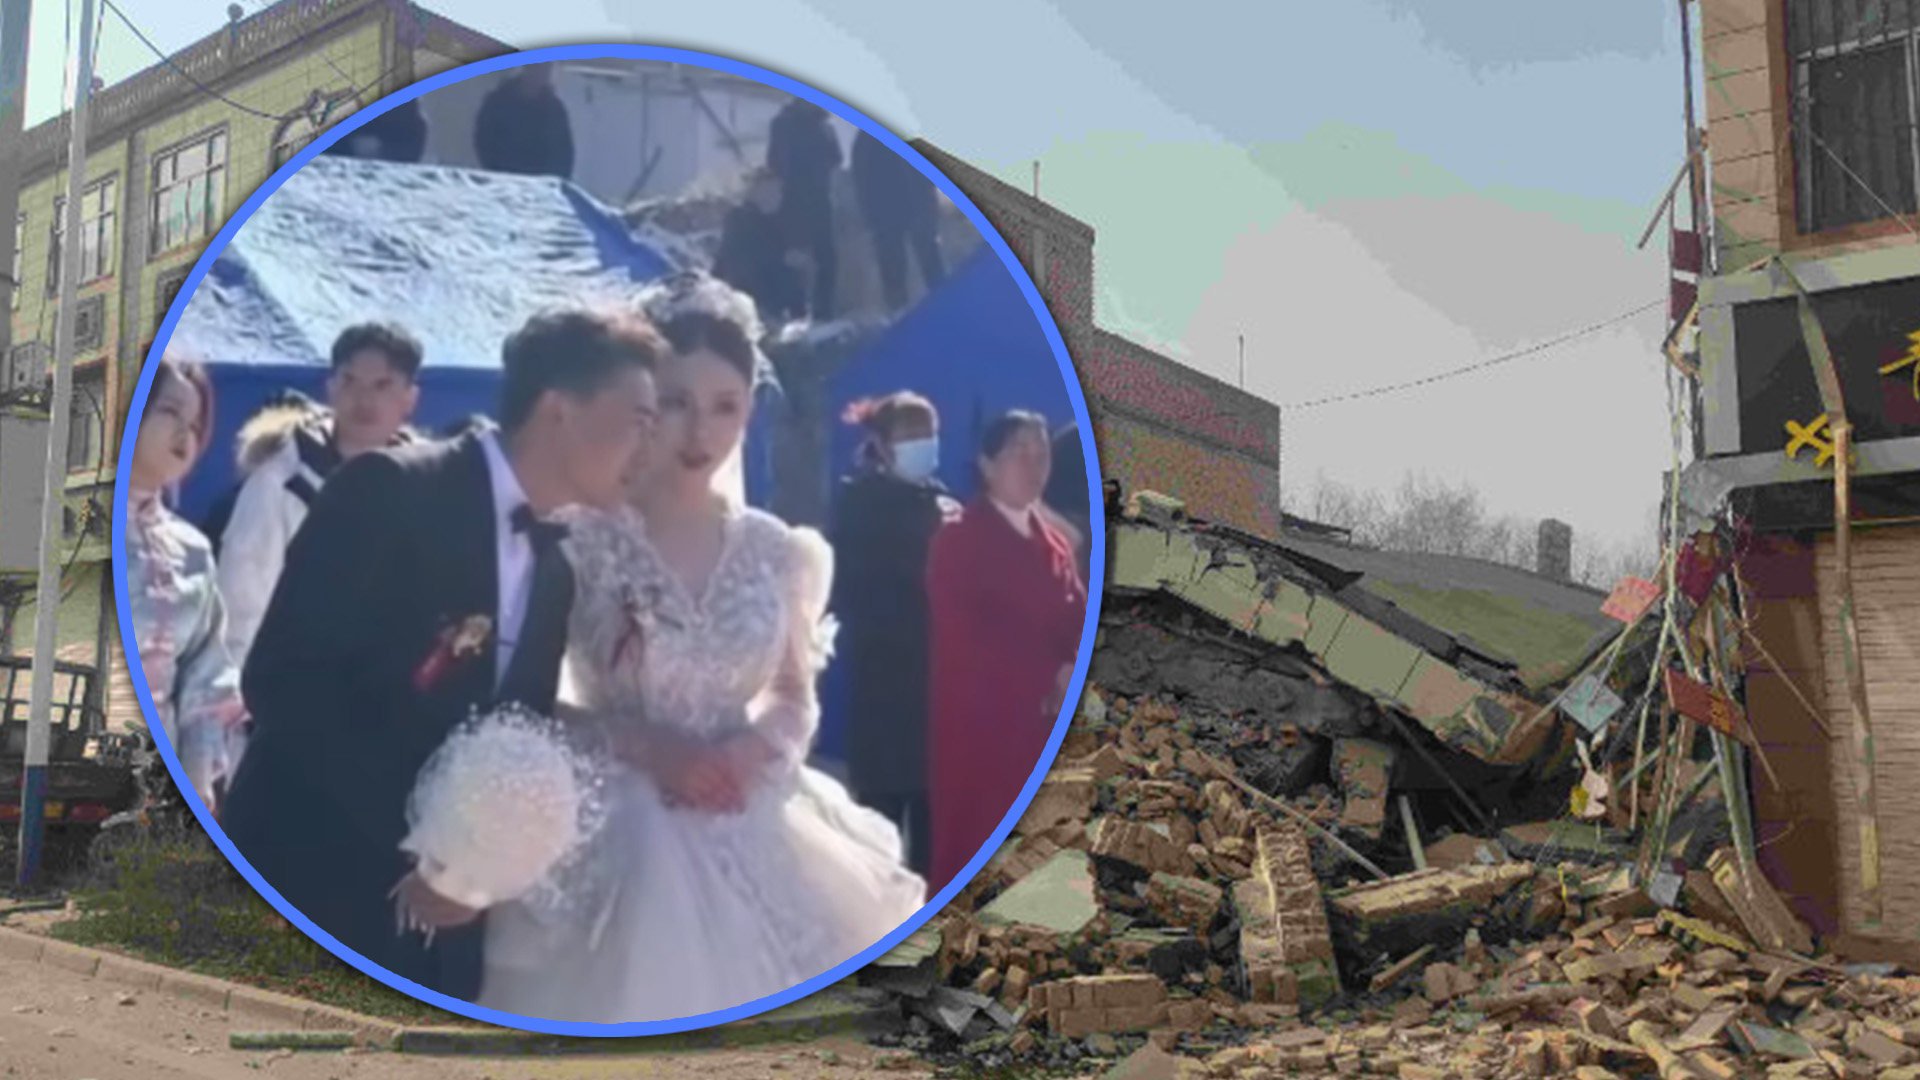 Mainland social media has been uplifted by the story of a couple who went ahead with their wedding in earthquake ravaged Gansu province. Photo: SCMP composite/Weibo/Douyin